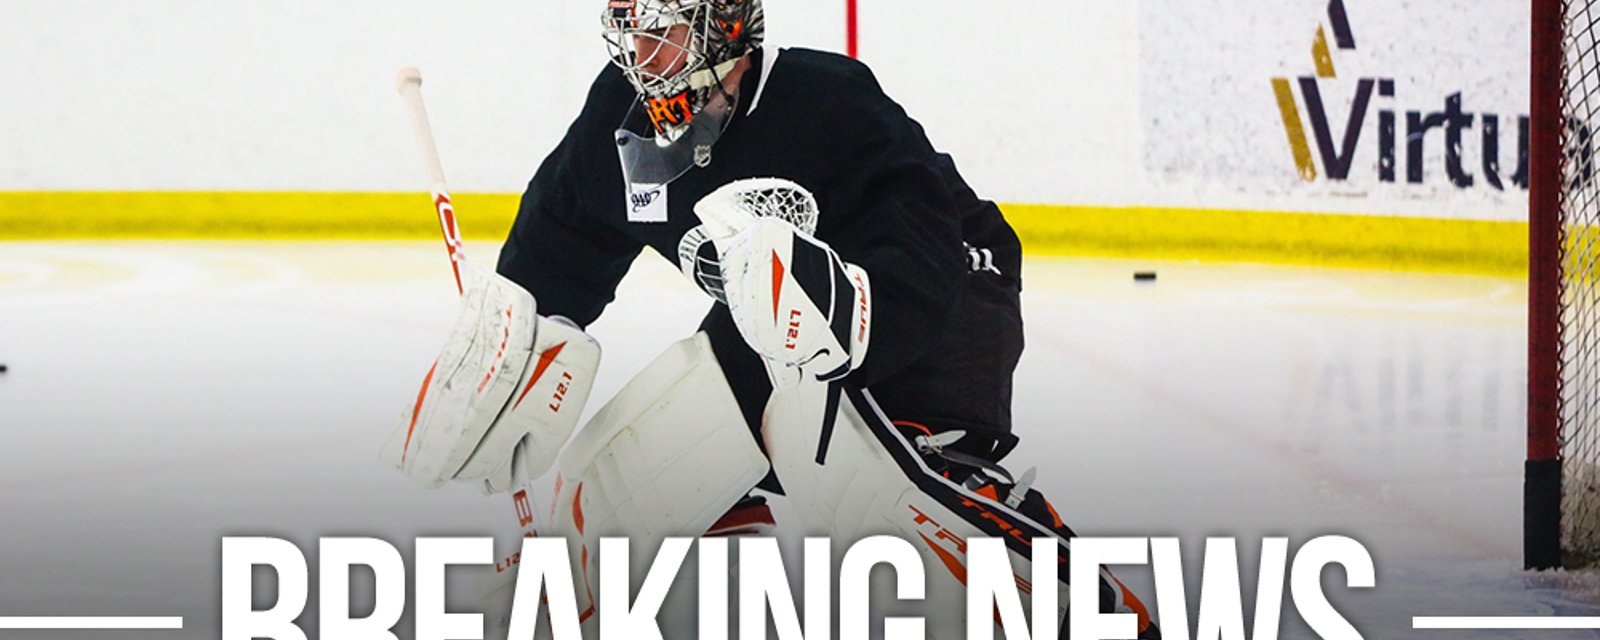 An update on Flyers' quarantine, including info on this weekend's game at Lake Tahoe